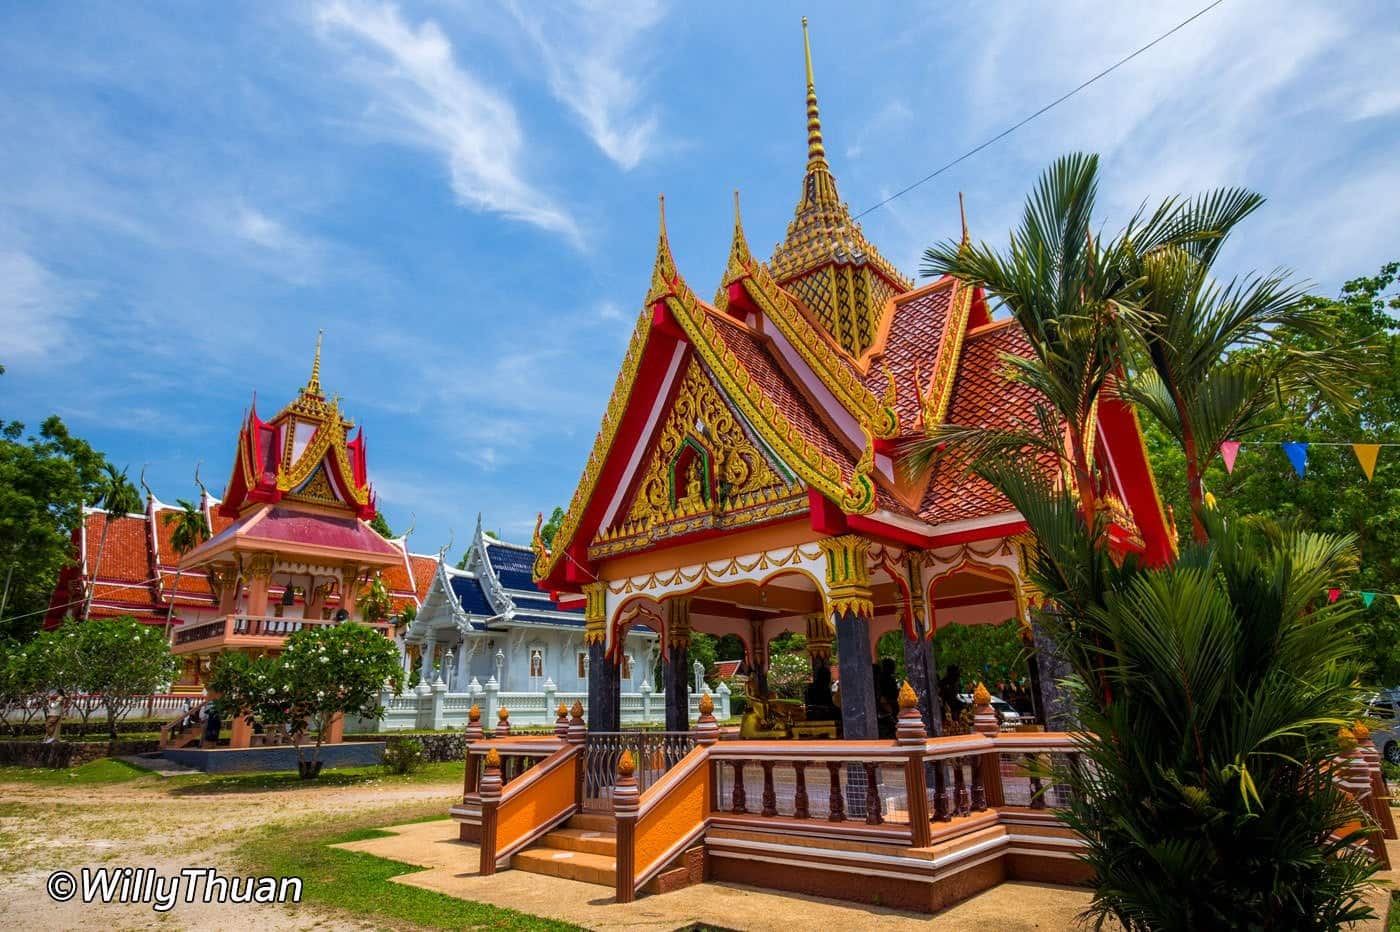 The-outside-view-of-the-Wat-Kathu-temple-of-Phuket